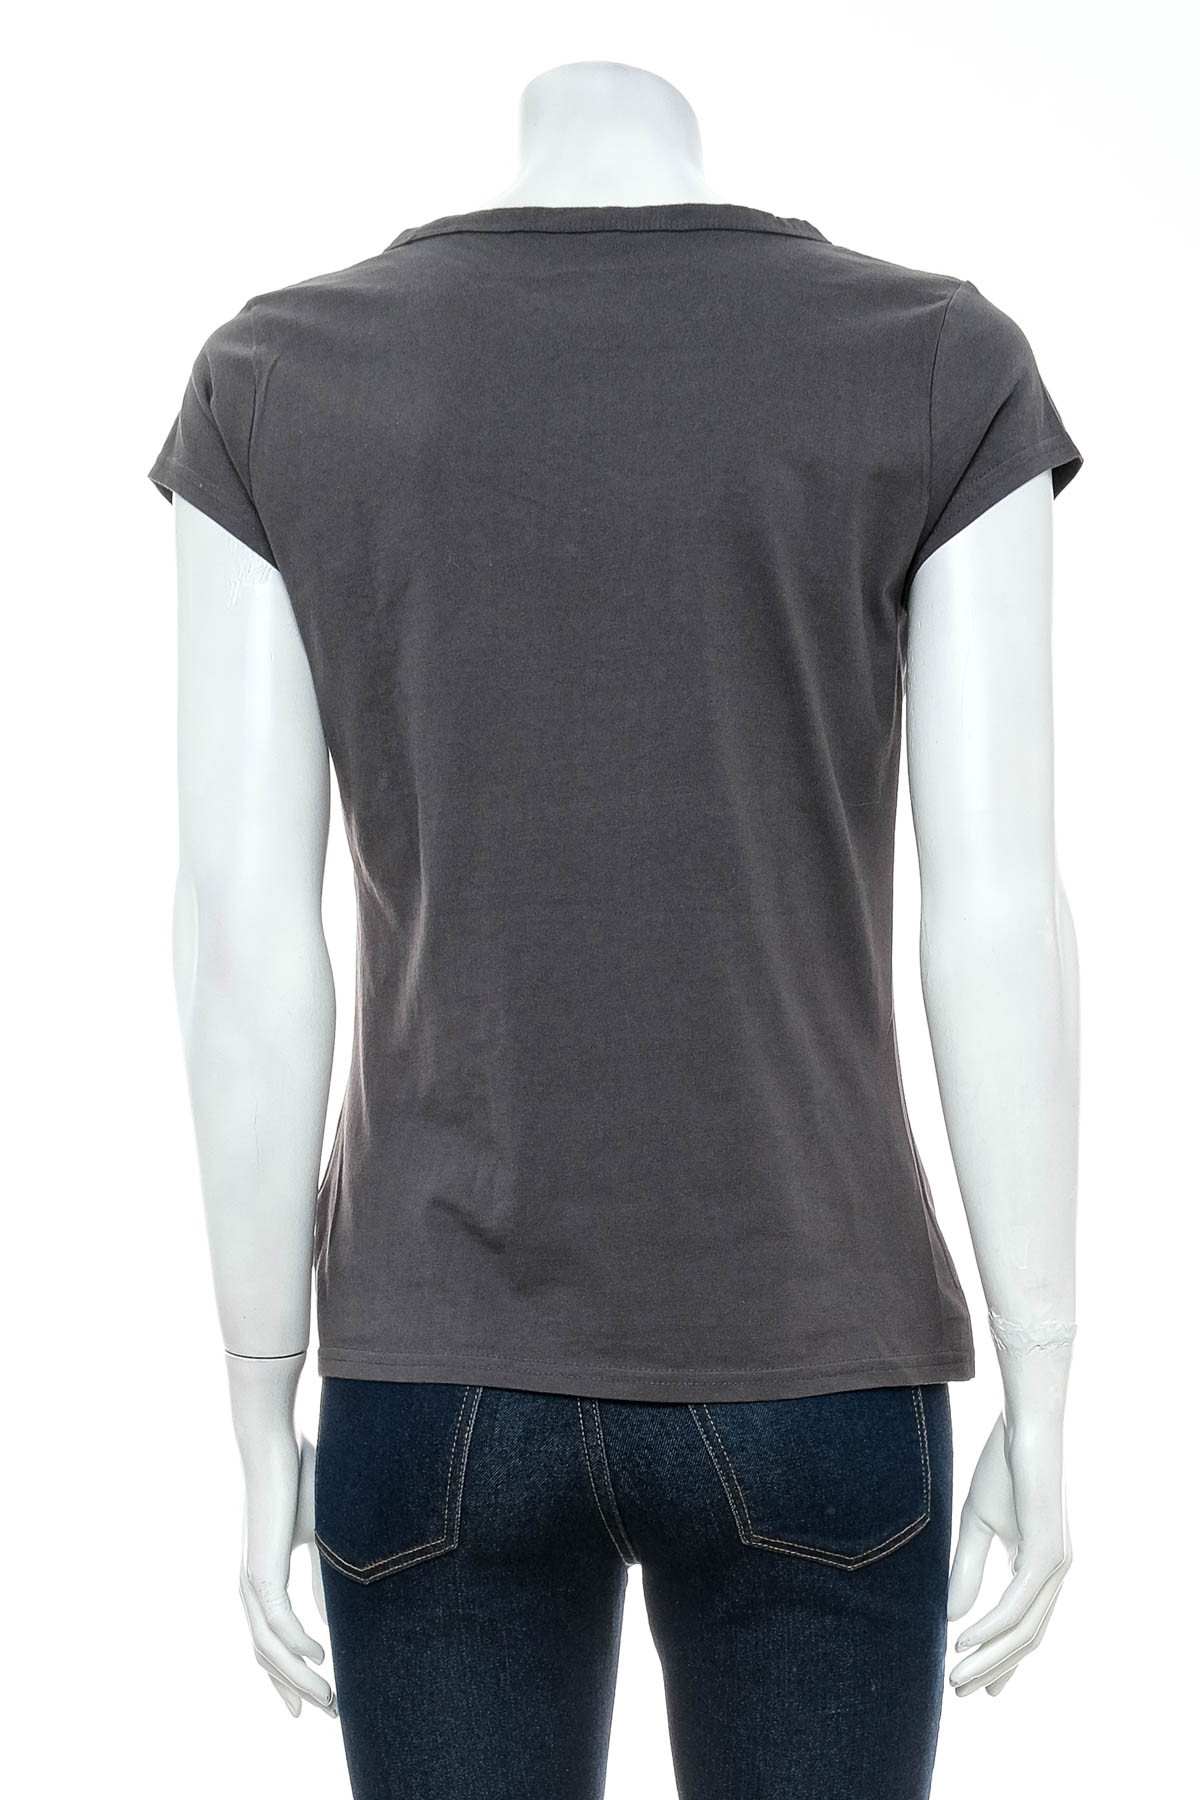 Women's t-shirt - QS by S.Oliver - 1